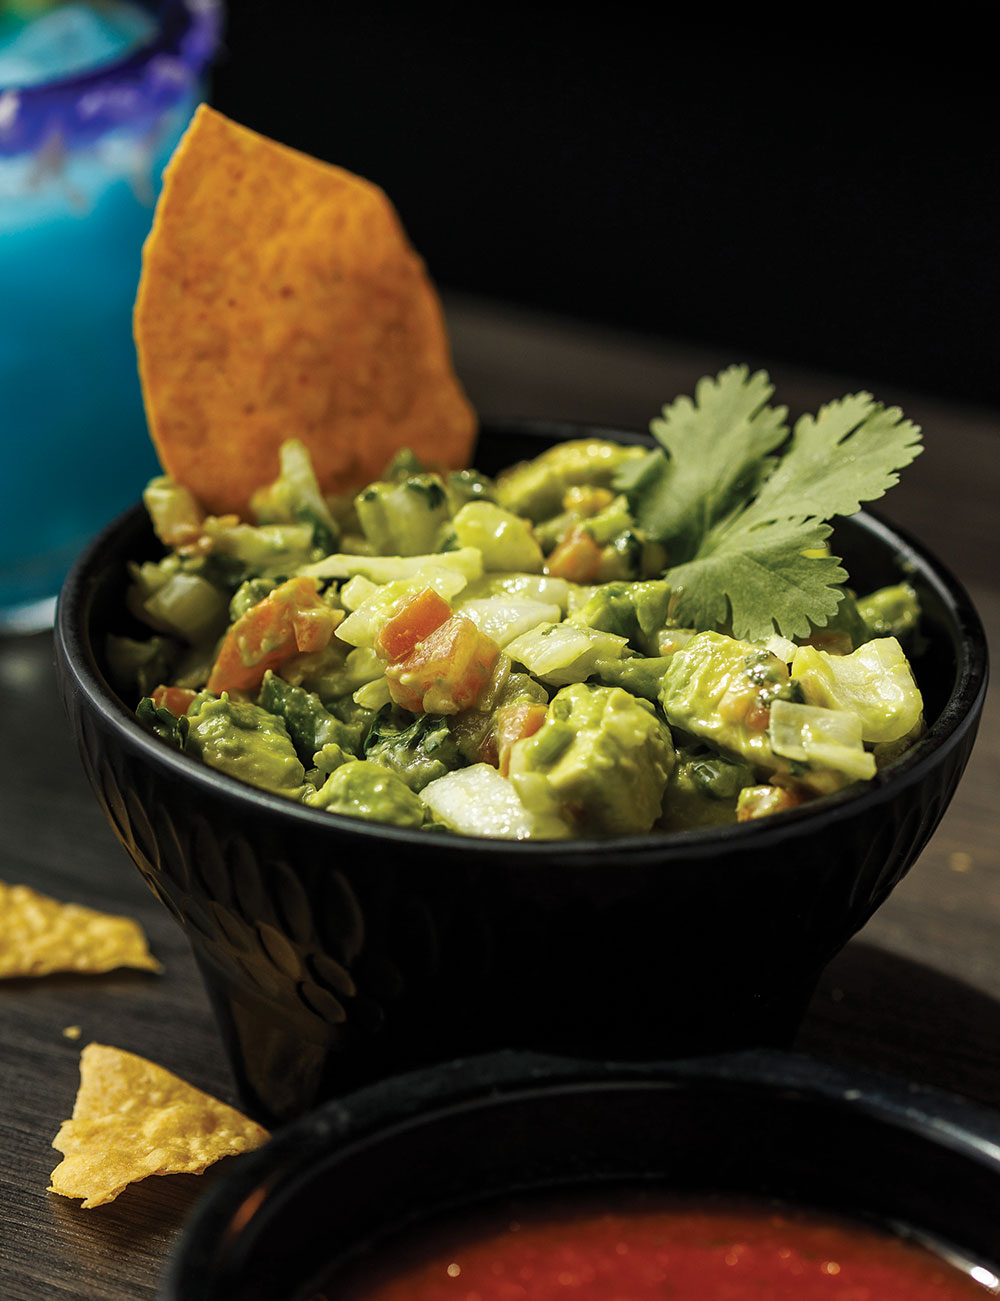 Chunky guacamole is a house specialty